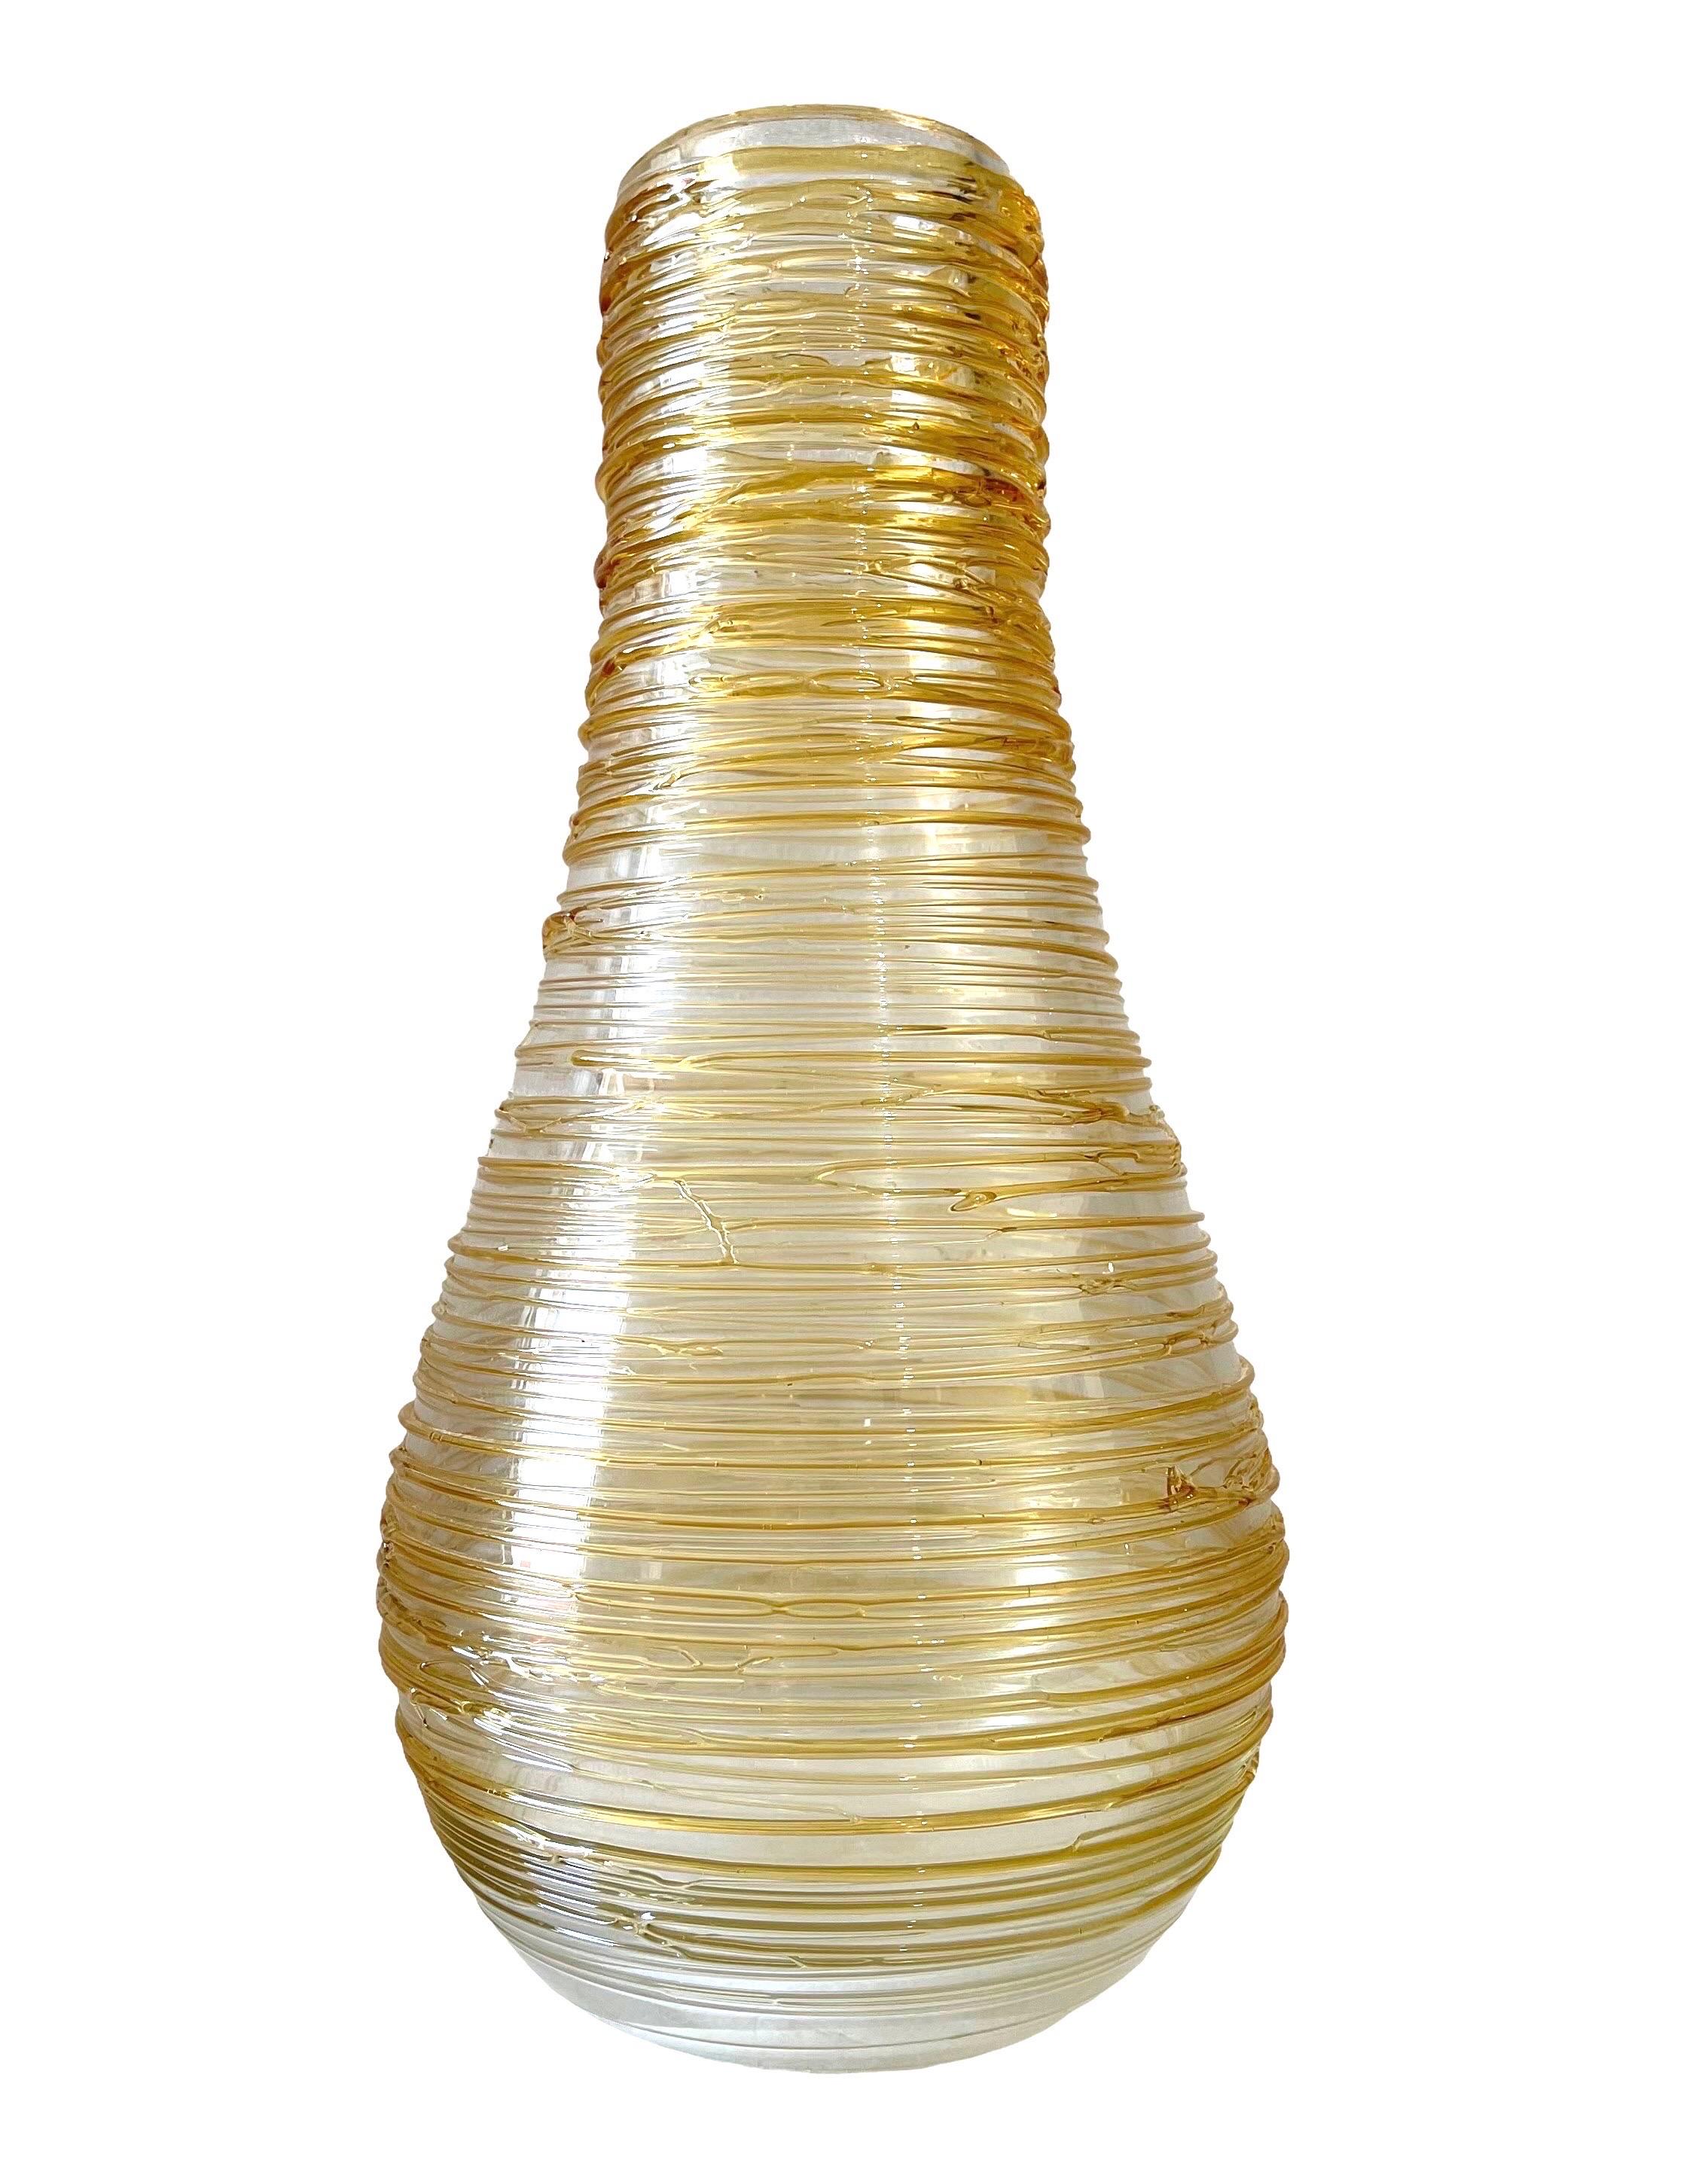 

Dimensions: 15.5 X 7 X 7 in. 
The organic shaped vase showcases an applied light gold colored threaded design enveloping the clear body, around. Hand signed Constantini S. It came from an important estate in the Palm Beach area.
Made in Murano,